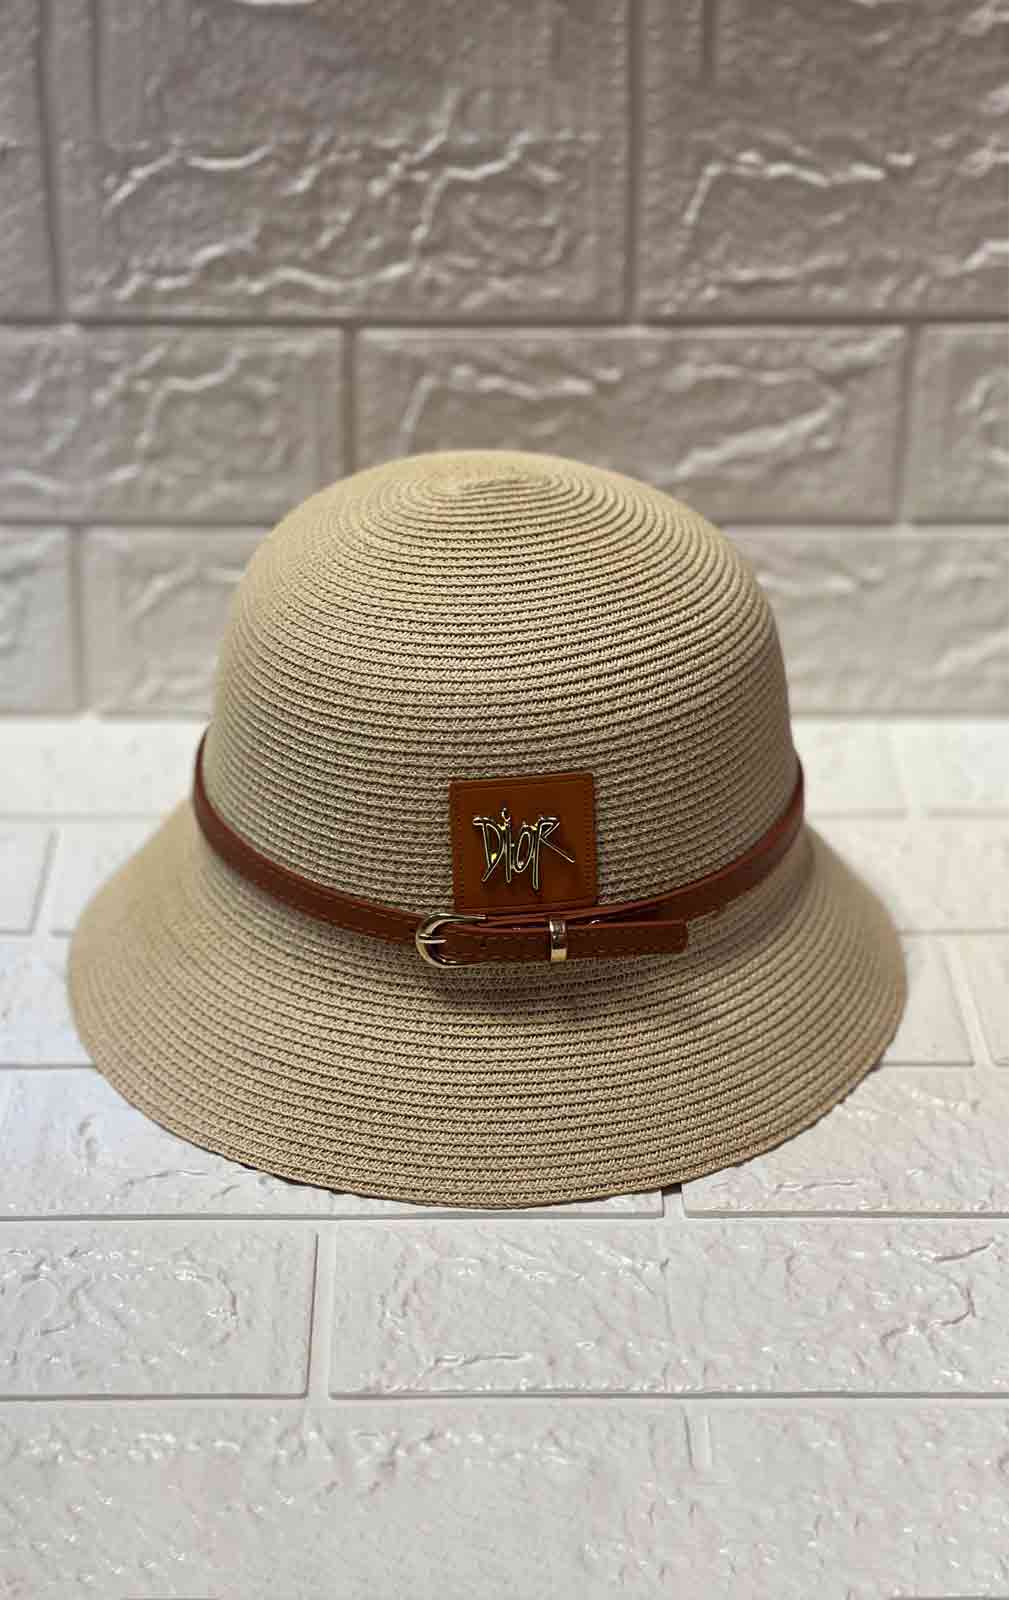 Dior Summer Hats For Woman-DD-HT